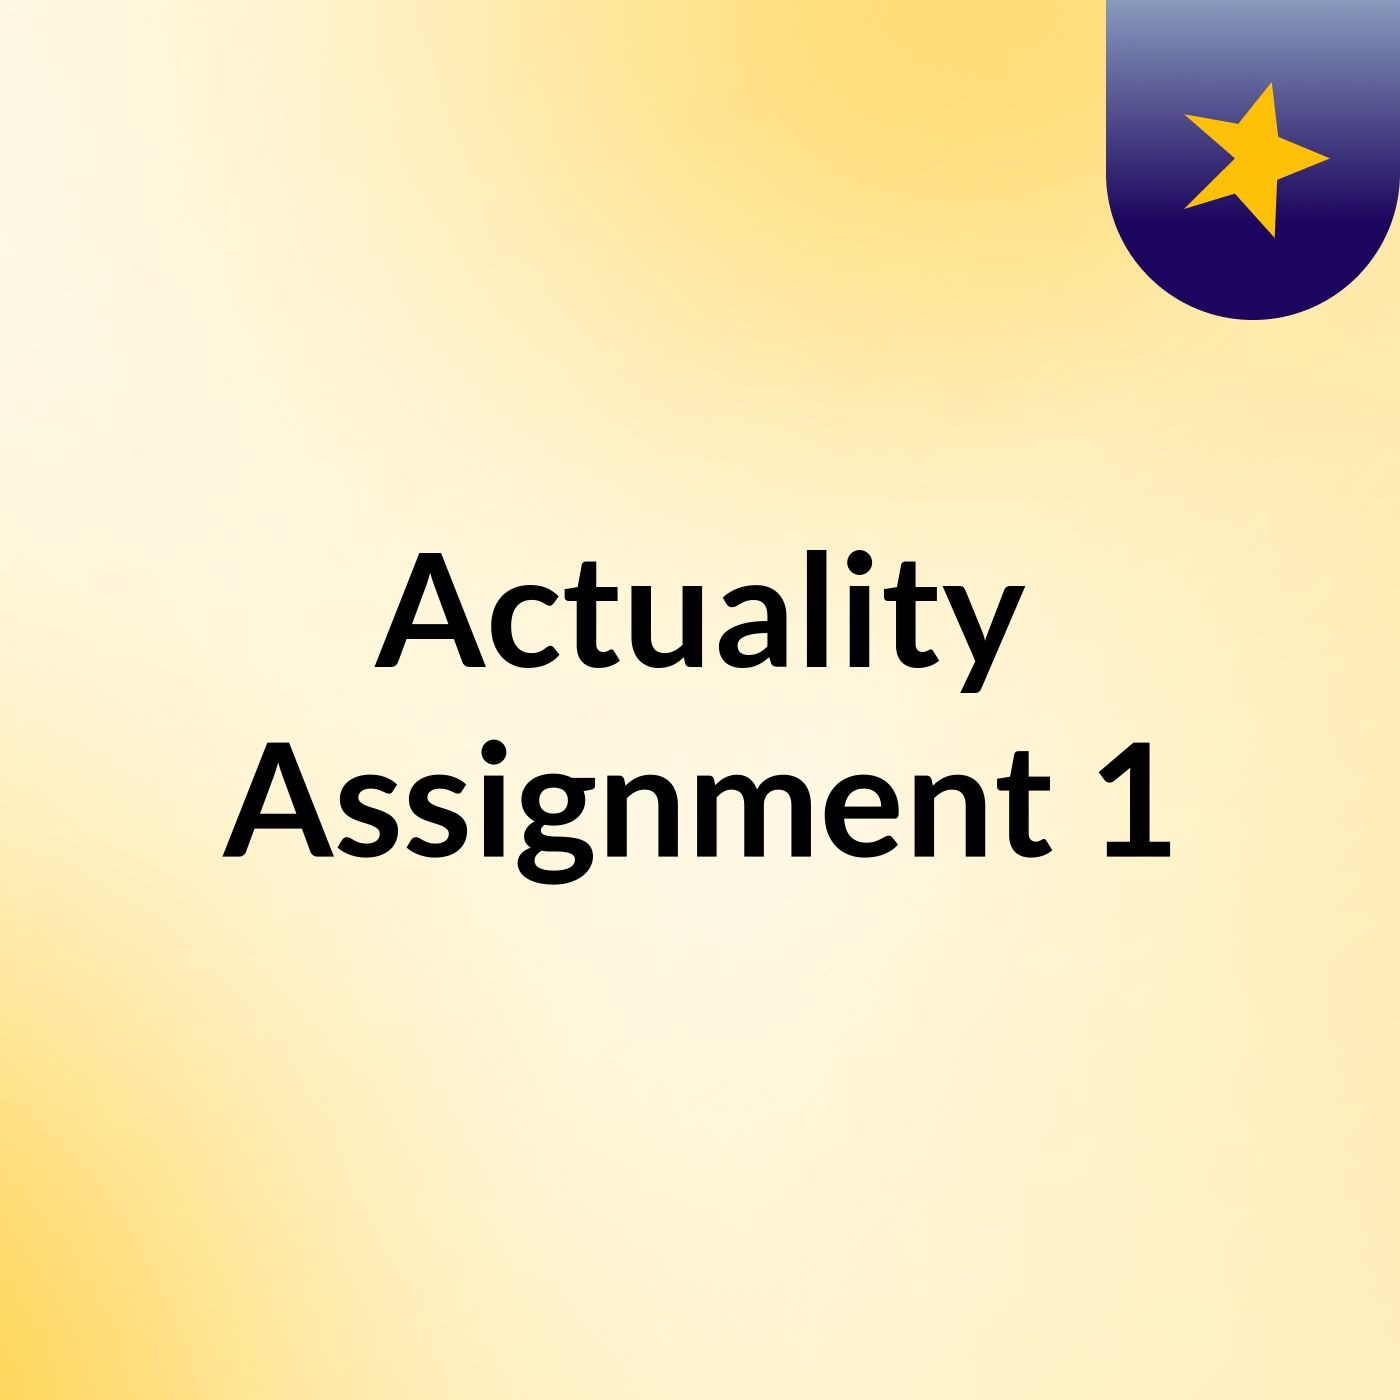 Episode 8 - Actuality Assignment 1